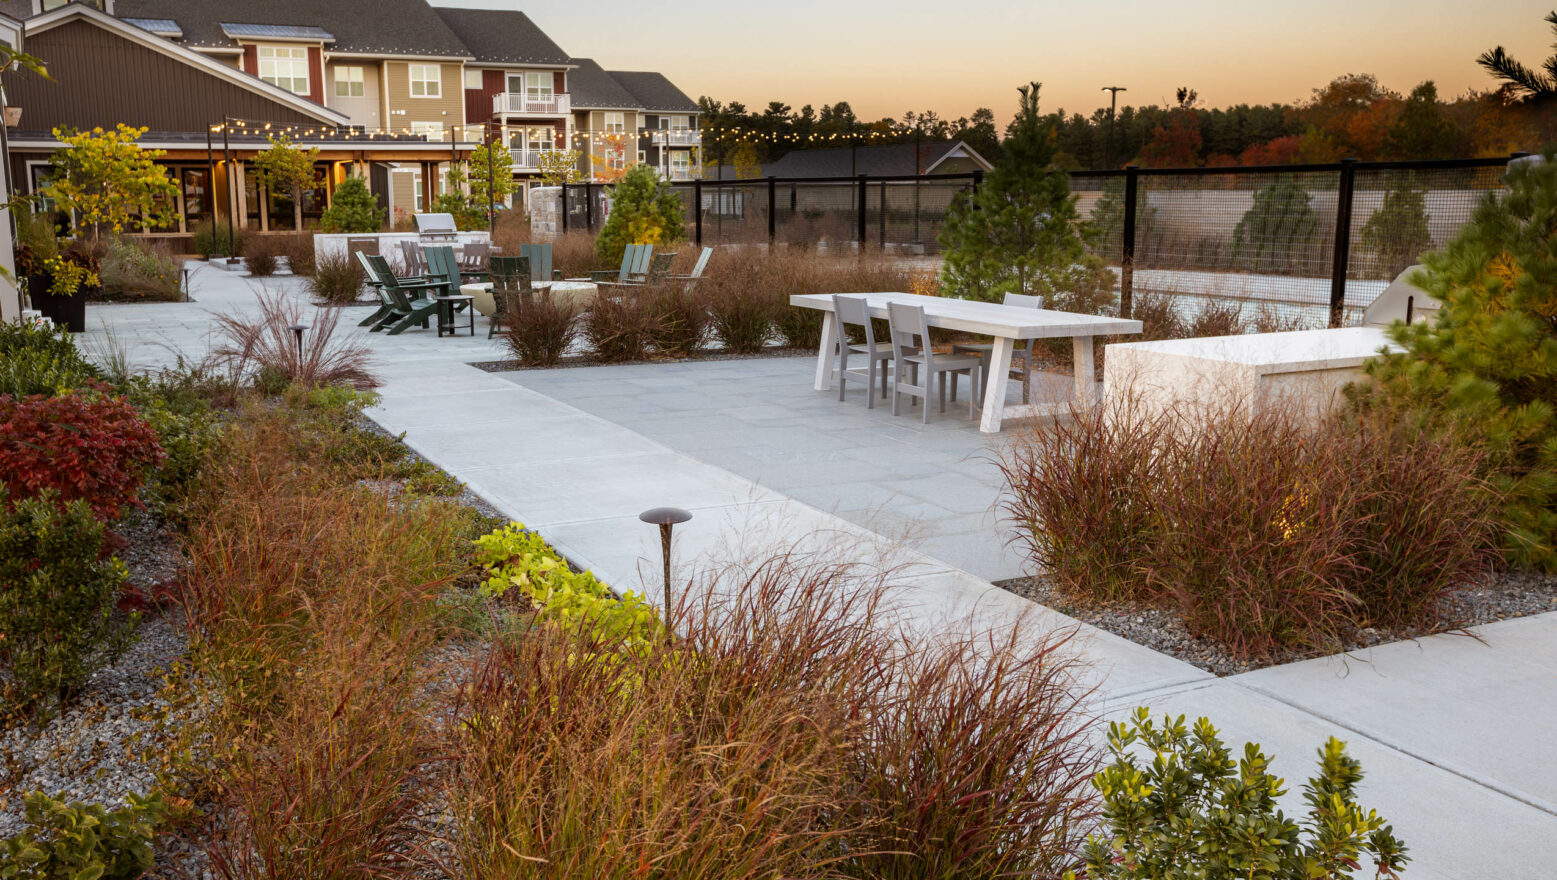 Apartment courtyard with a community tables, outdoor kitchens and lights. Commercial landscape design-build by Dex by Terra.